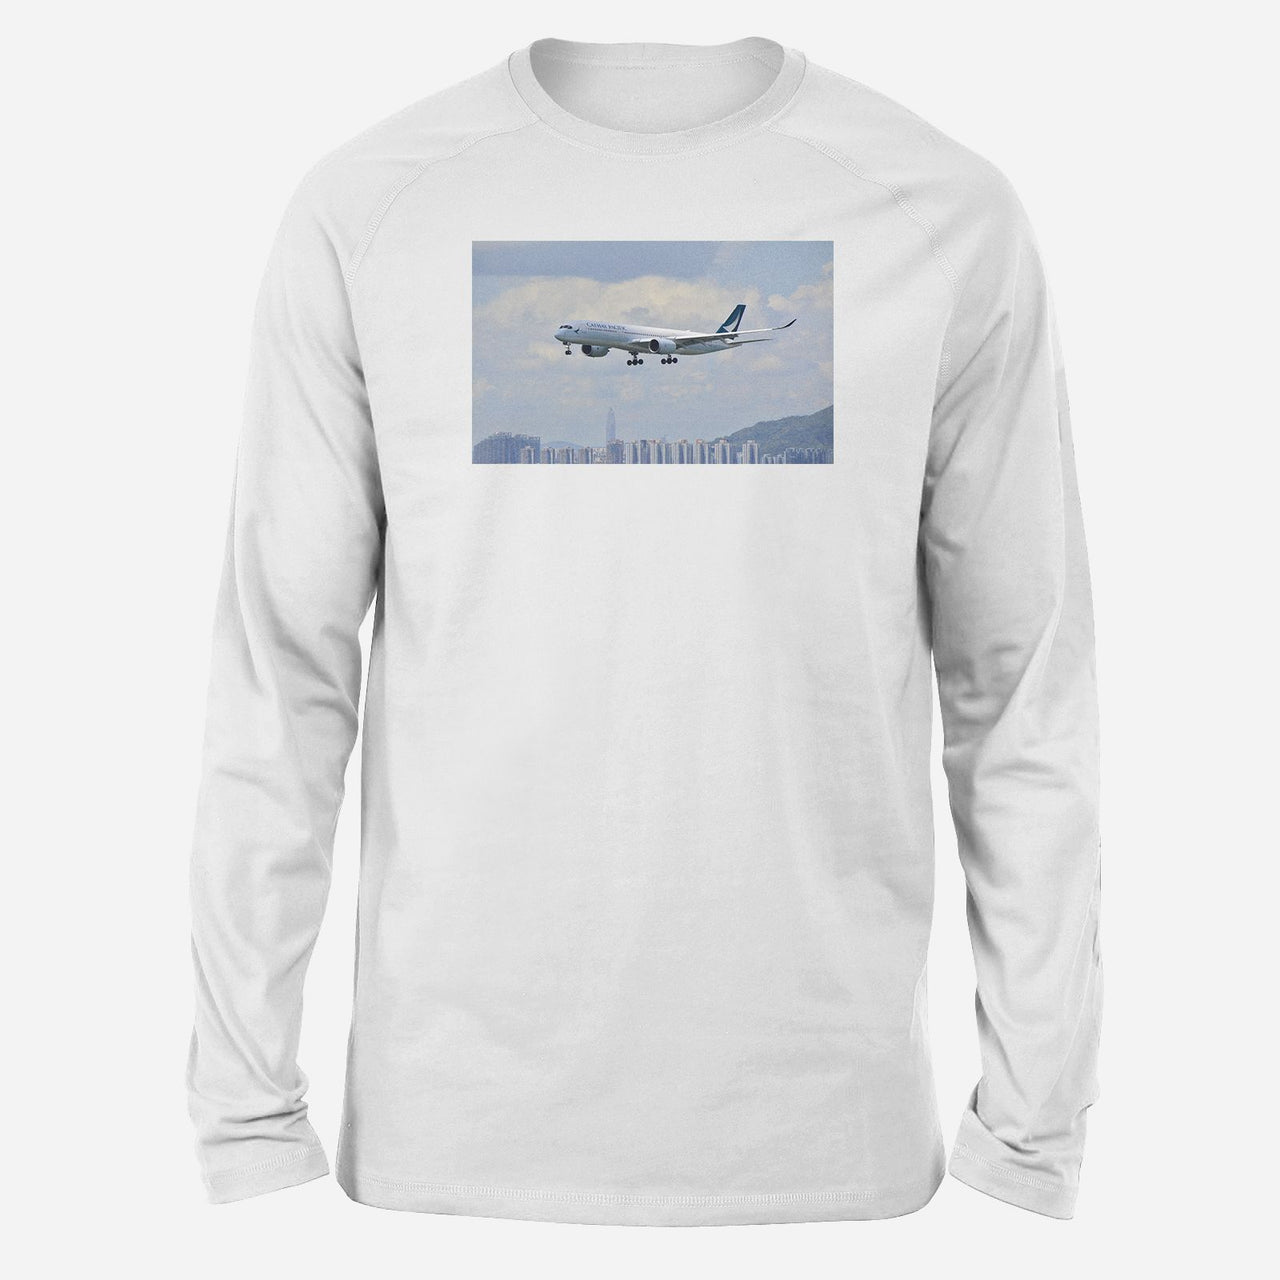 Cathay Pacific Airbus A350 Designed Long-Sleeve T-Shirts